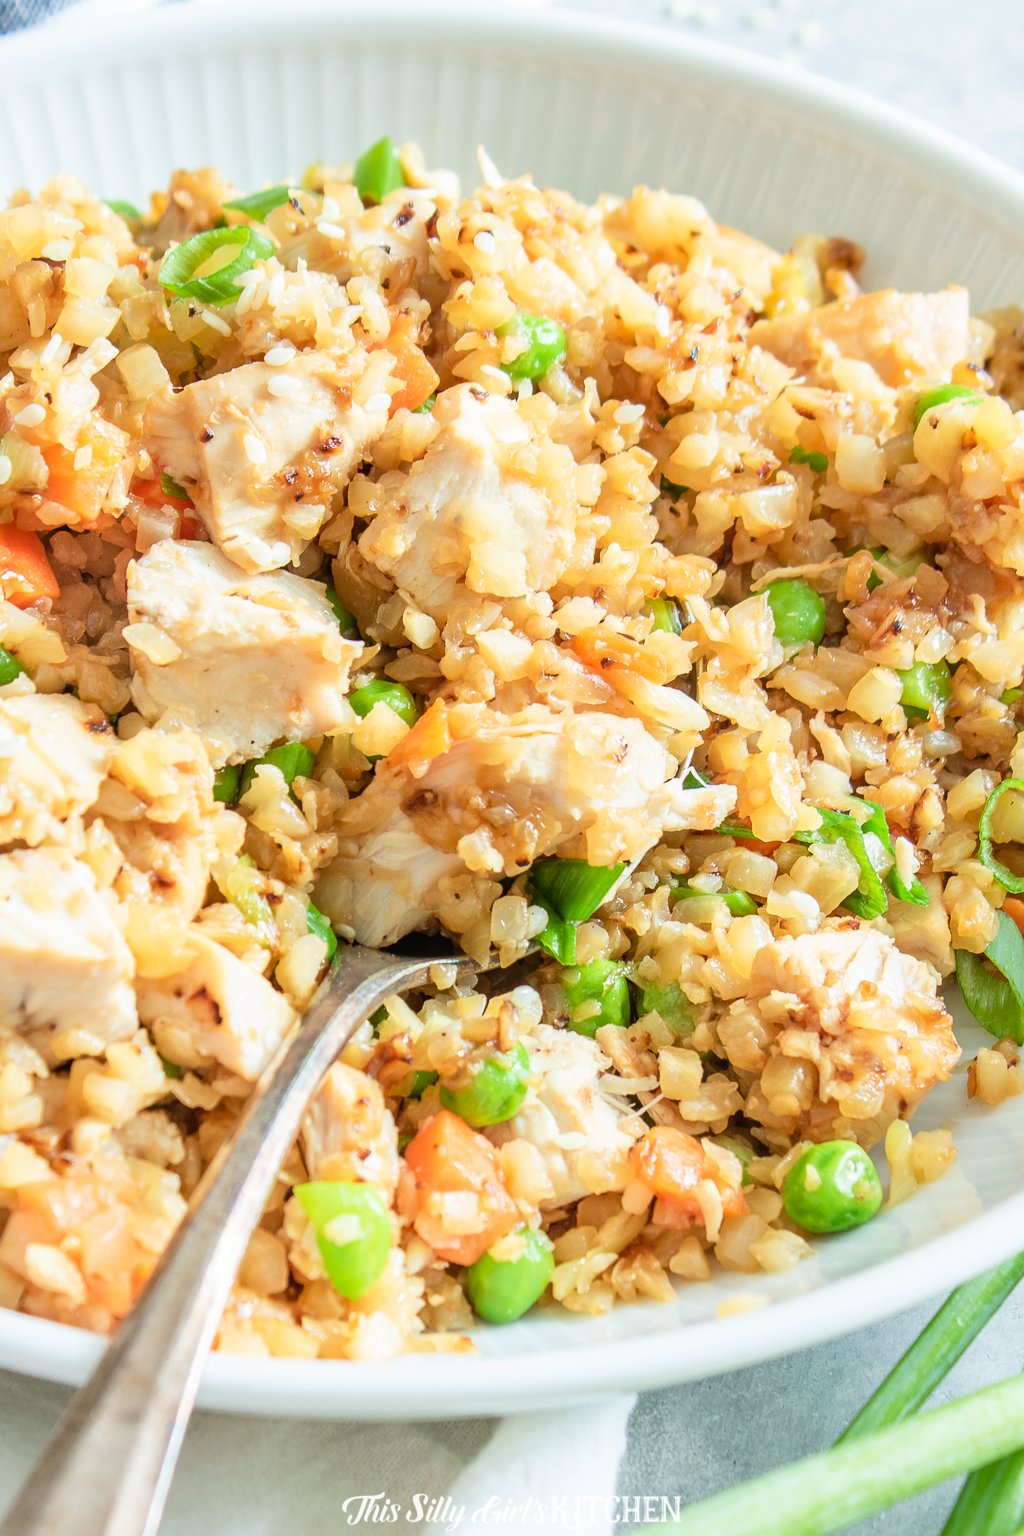 Loaded with veggies and chicken this cauliflower chicken fried rice is a healthier alternative to classic fried rice. #recipe from thissillygirlskitchen.com #friedrice #chicken #chickenfriedrice #cauliflowerrice